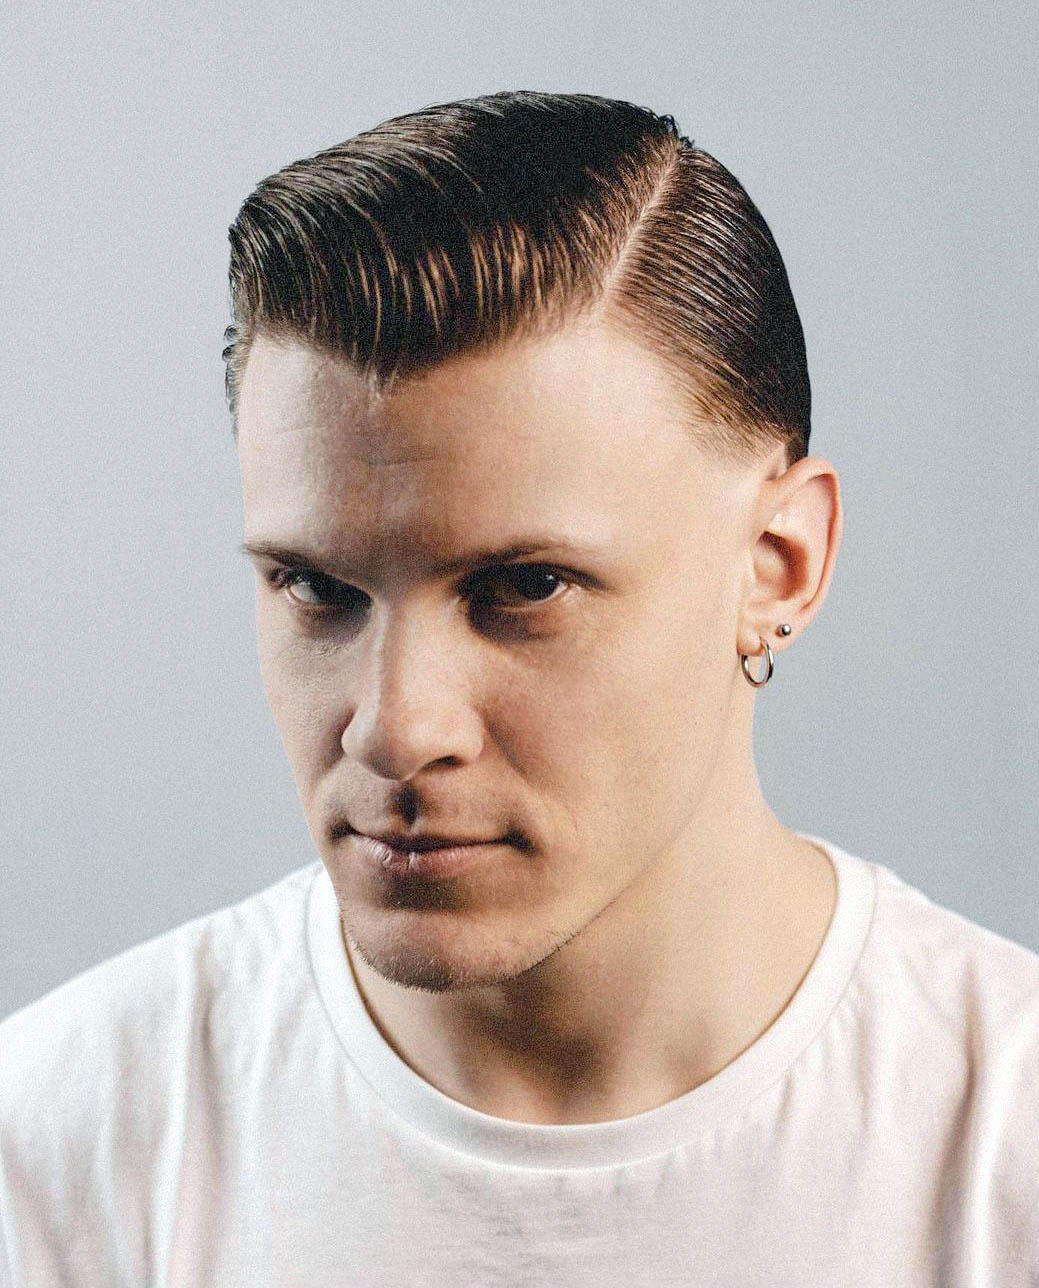 Comb Over with Side Part and Low Fade